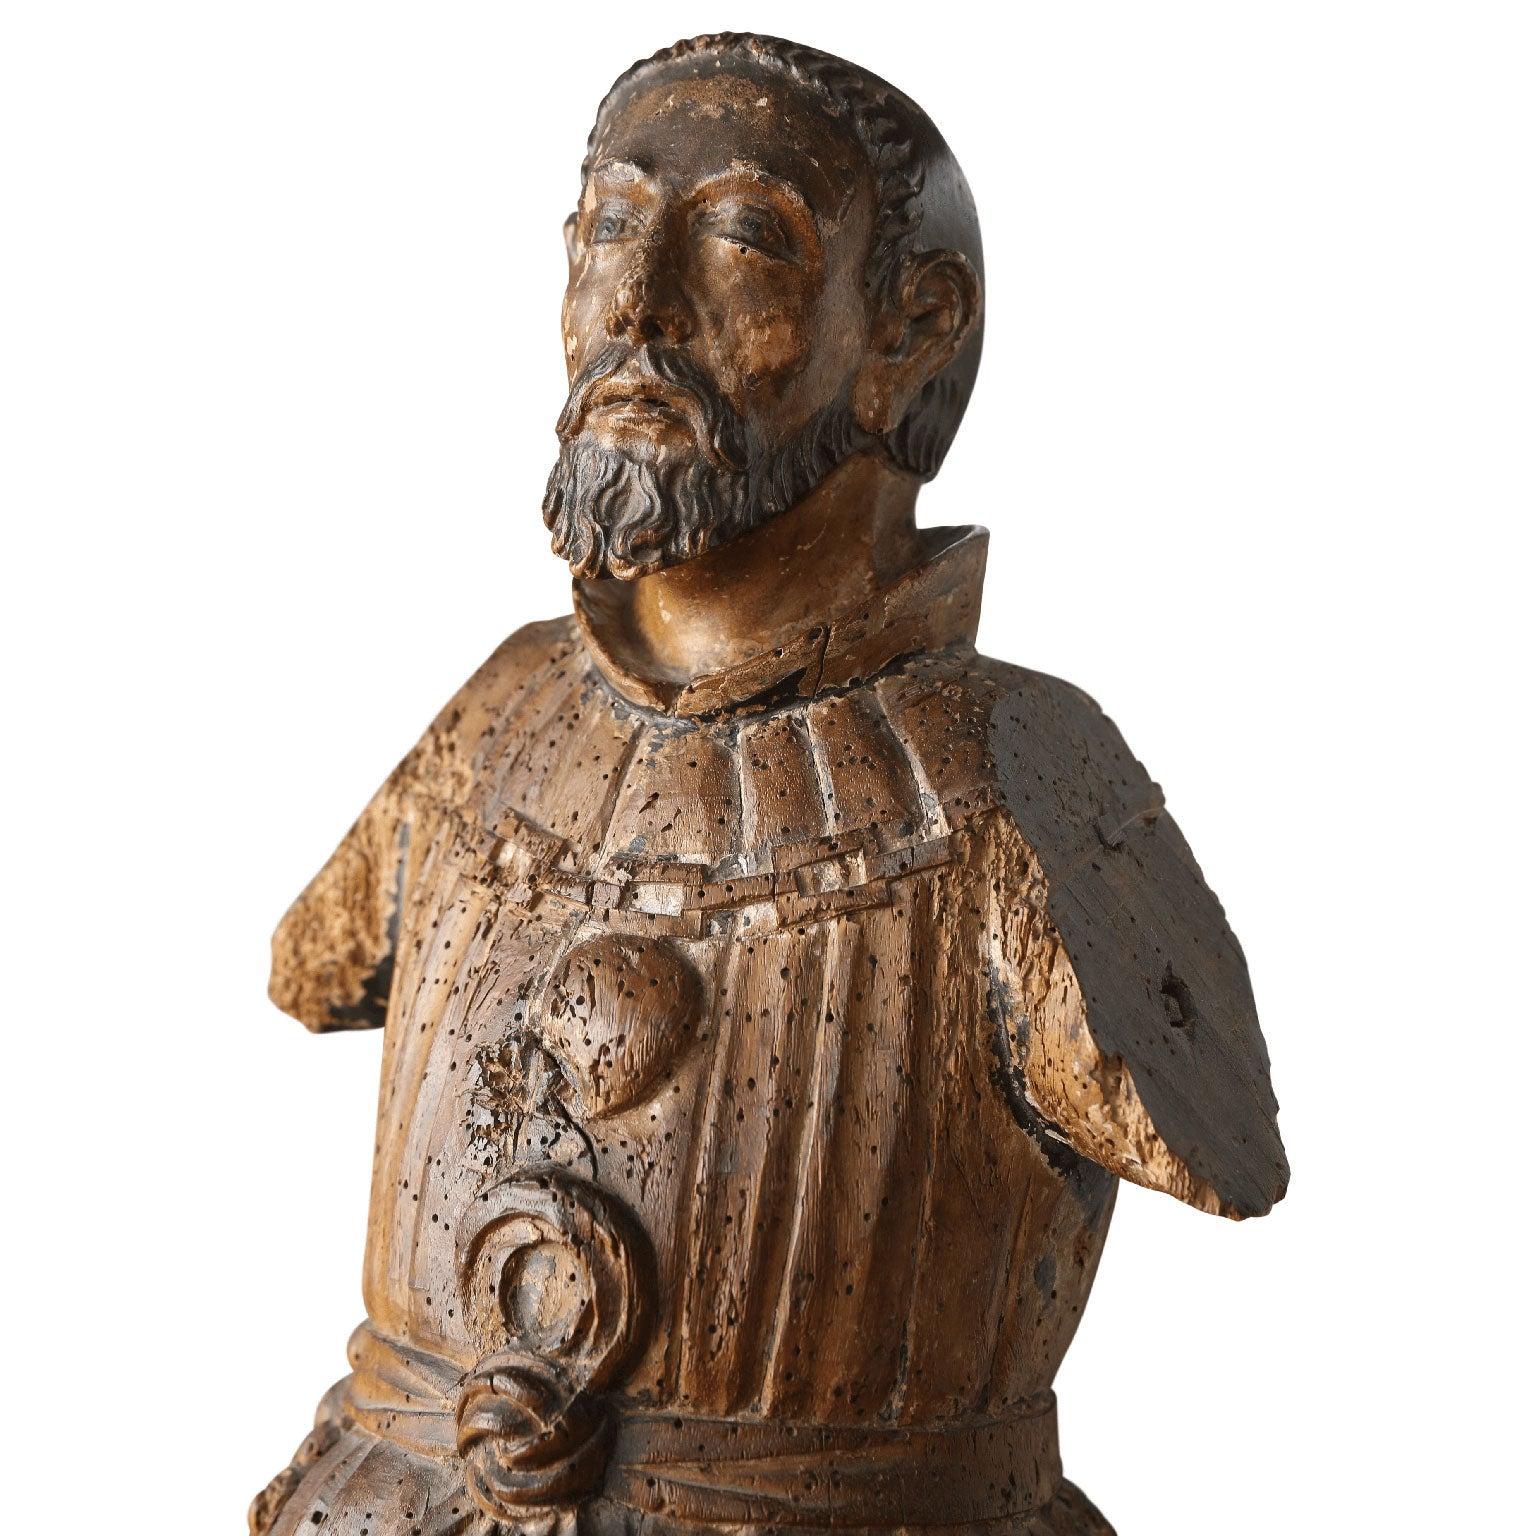 Hand carved Italian Santo: figure of Franciscan abbot or saint, circa 1780-1800.

Note: Regional differences in humidity and climate during shipping may cause antique and vintage wood to shrink and/or split along its grain, veneer to loosen and/or